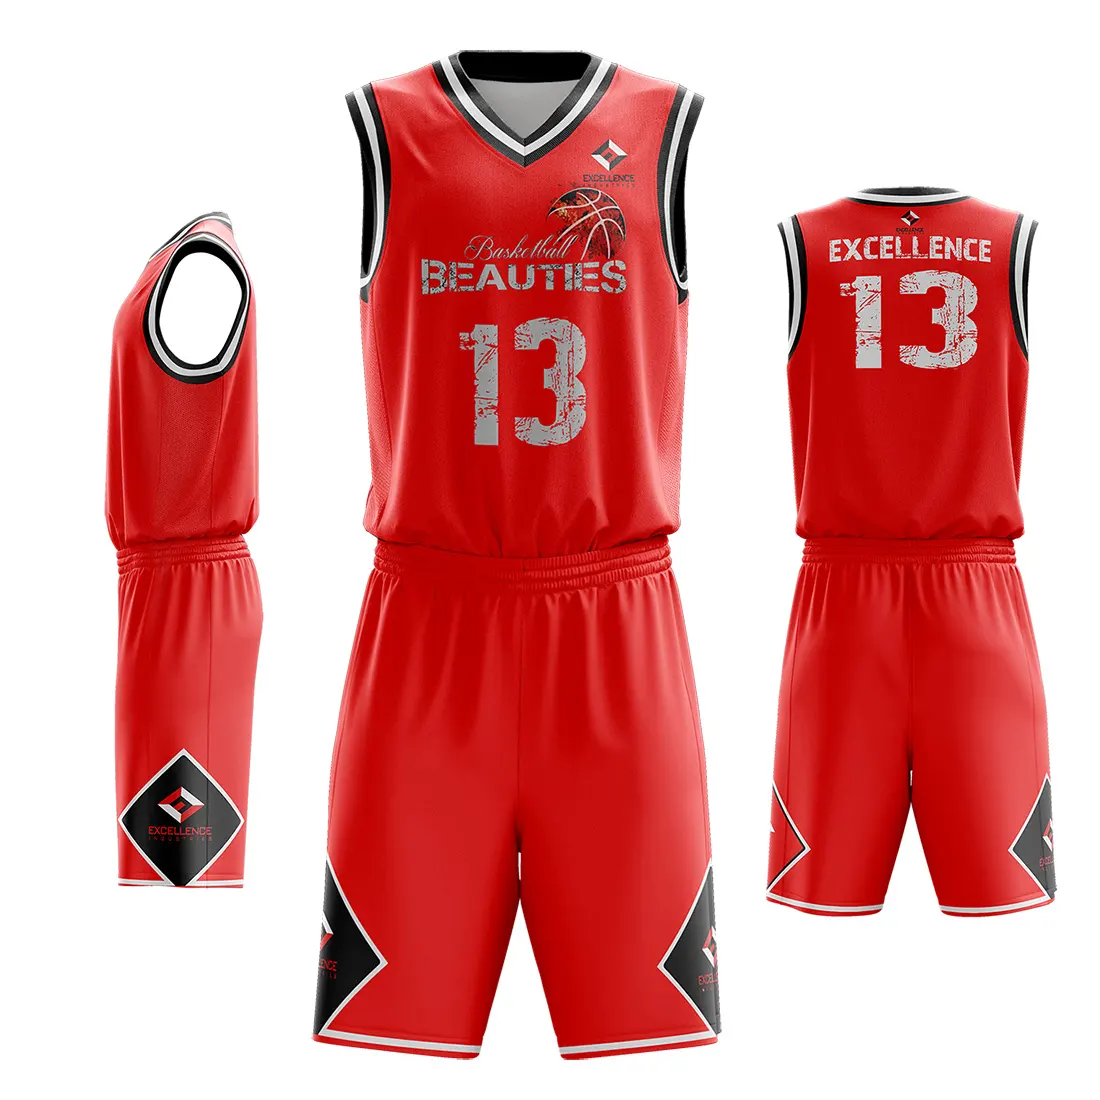 Fully customized low price high quality basketball uniforms no moq limit sublimation printed Chrome tackle twill Uniforms set